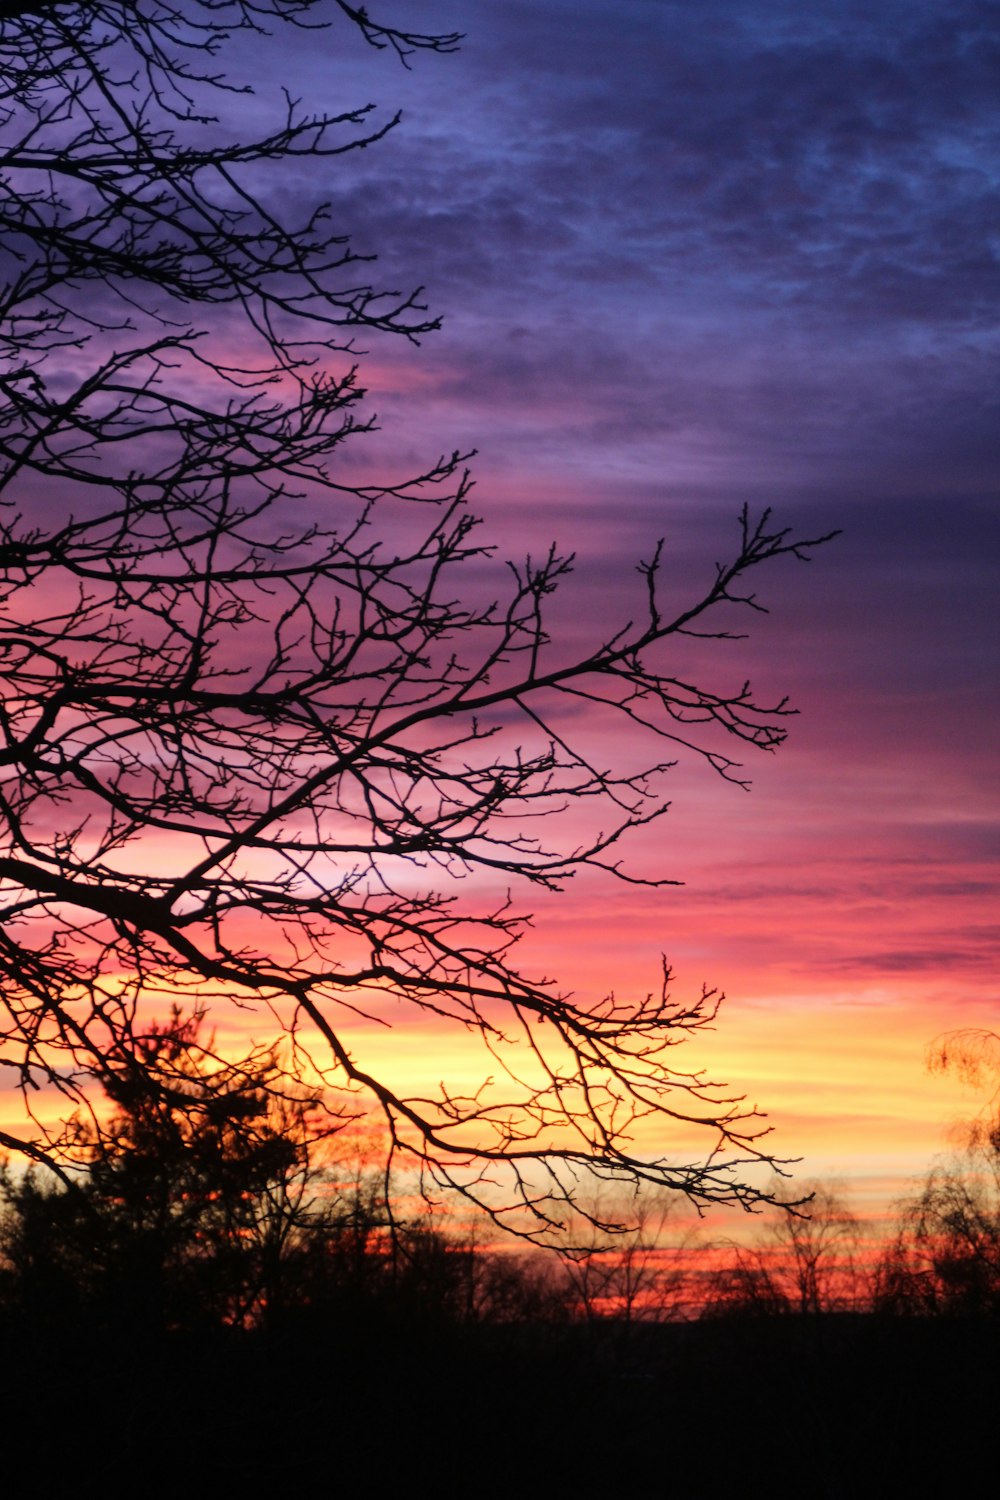 a tree with no leaves in front of a colorful sky